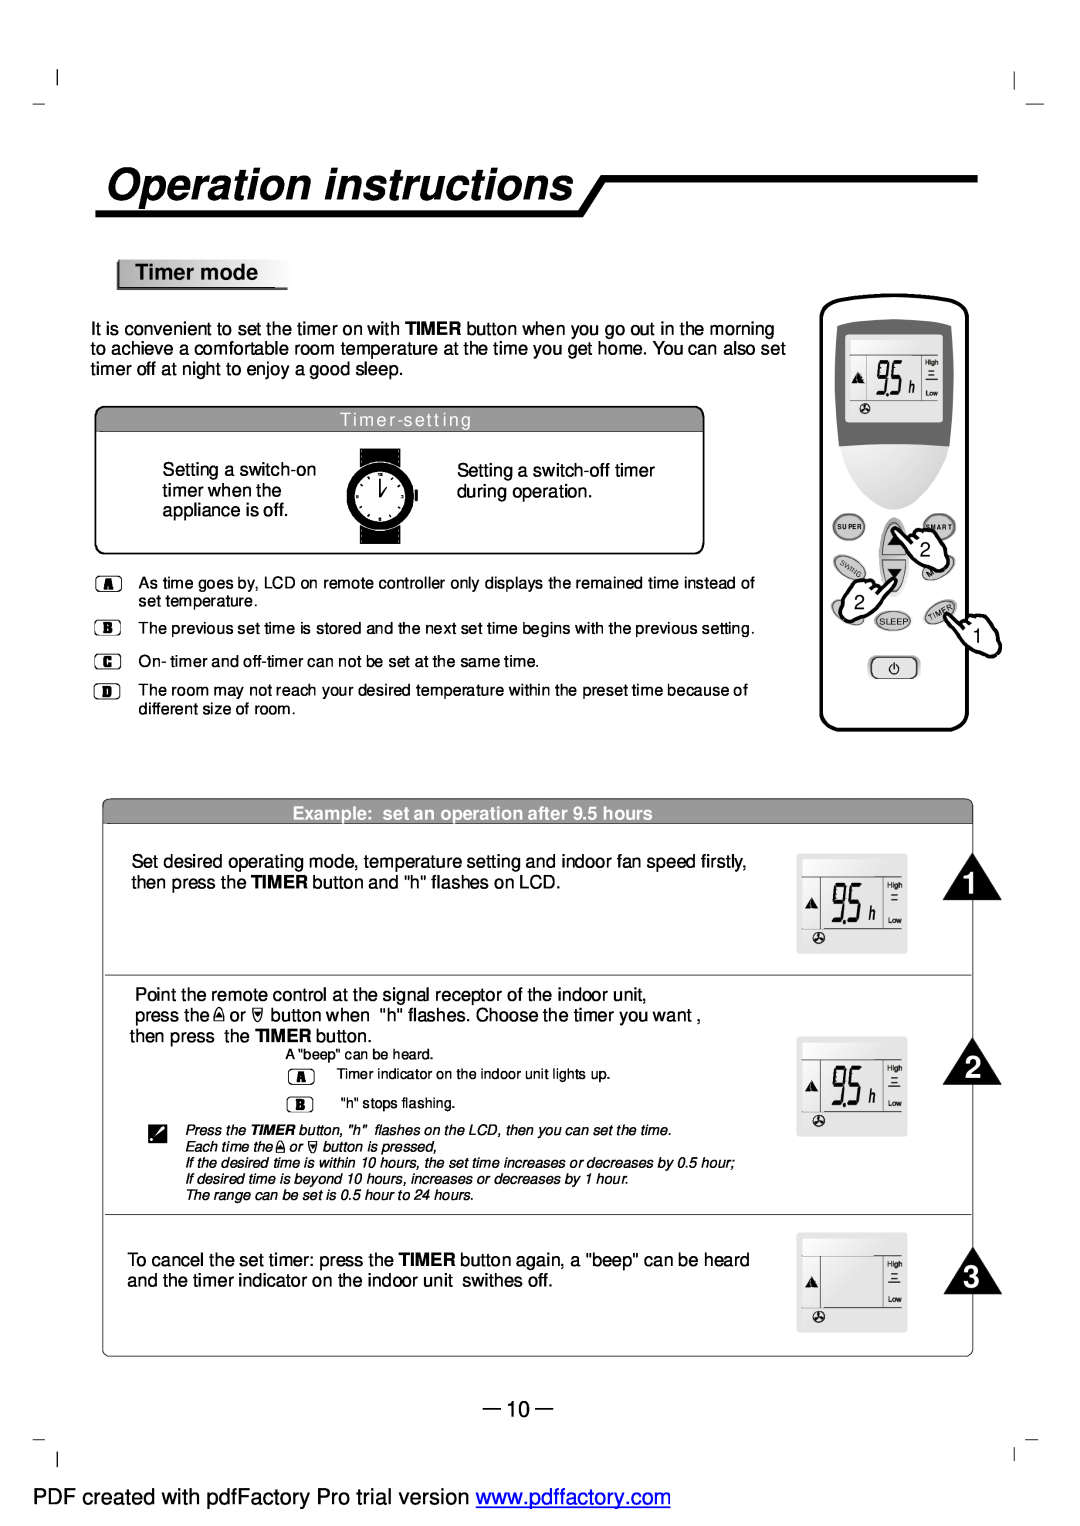 NEC RIH-6867 user manual Operation instructions, Timermode, Timer-setting, Example set an operation after 9.5 hours 